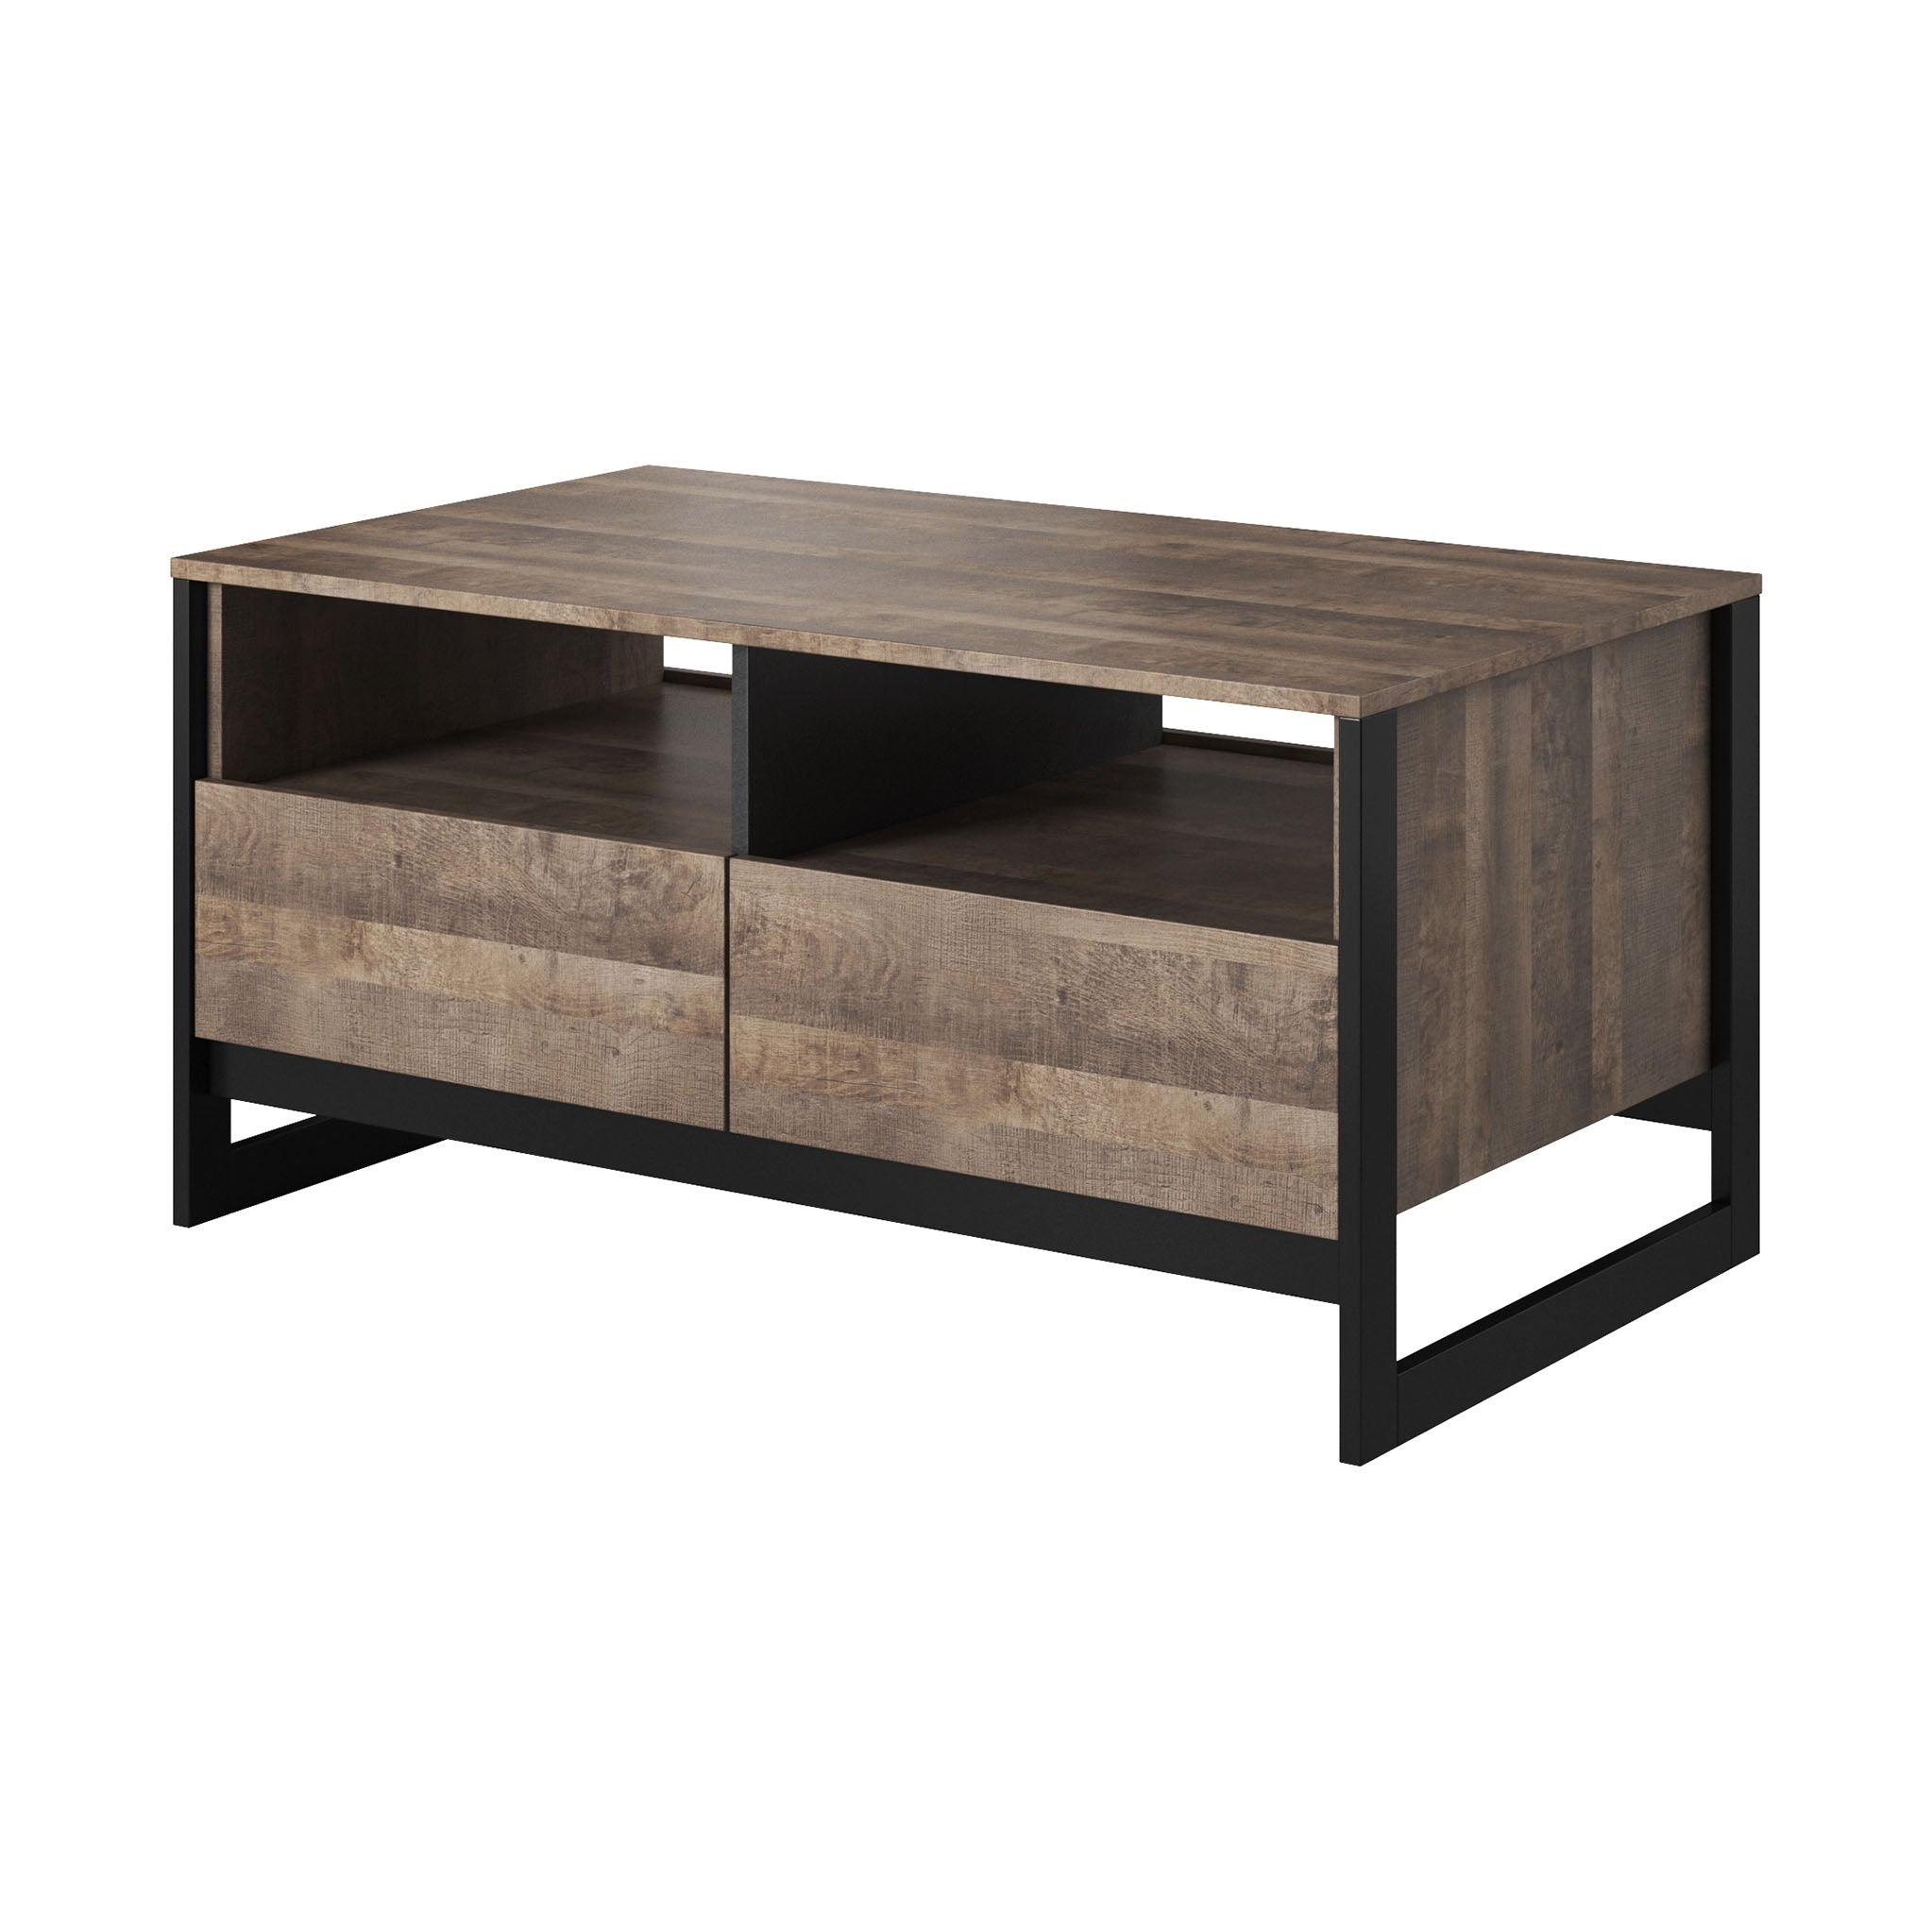 Ezra Oak Look Coffee Table With Storage For Living Room Roseland